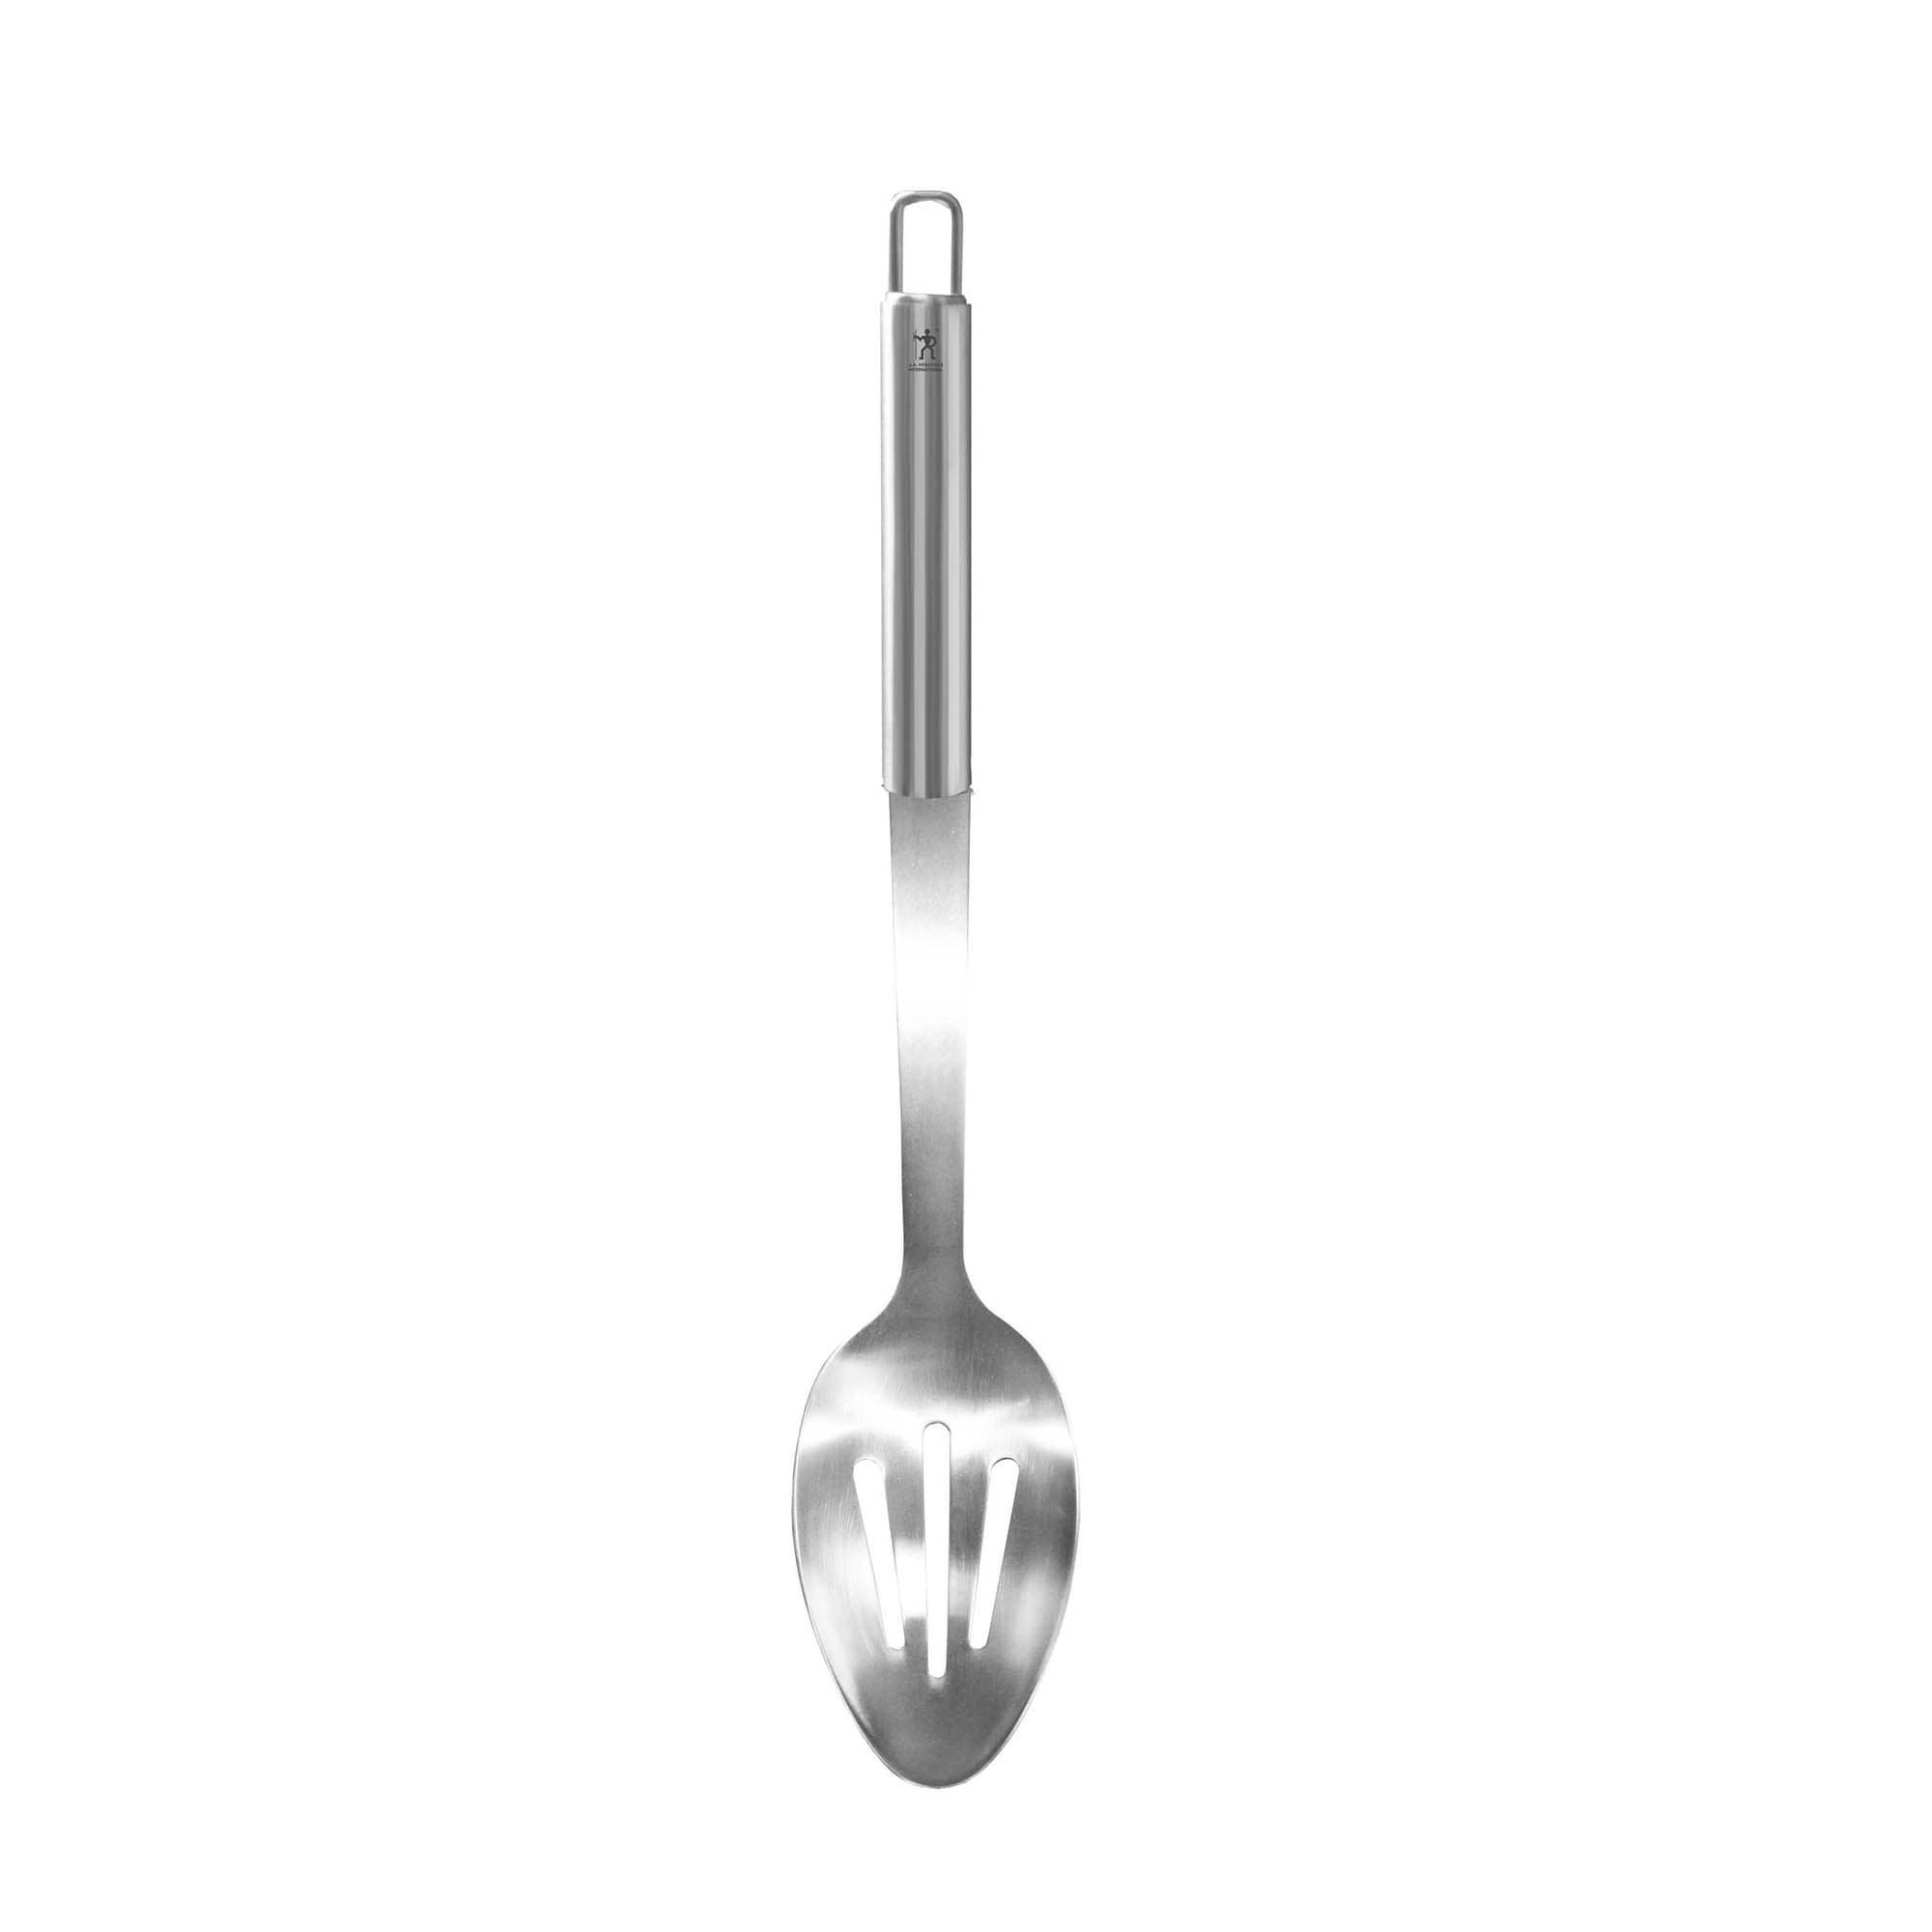 https://ak1.ostkcdn.com/images/products/is/images/direct/d111999caf63688773a821981f550a7c7b94639e/J.A.-Henckels-International-Stainless-Steel-Slotted-Serving-Spoon.jpg